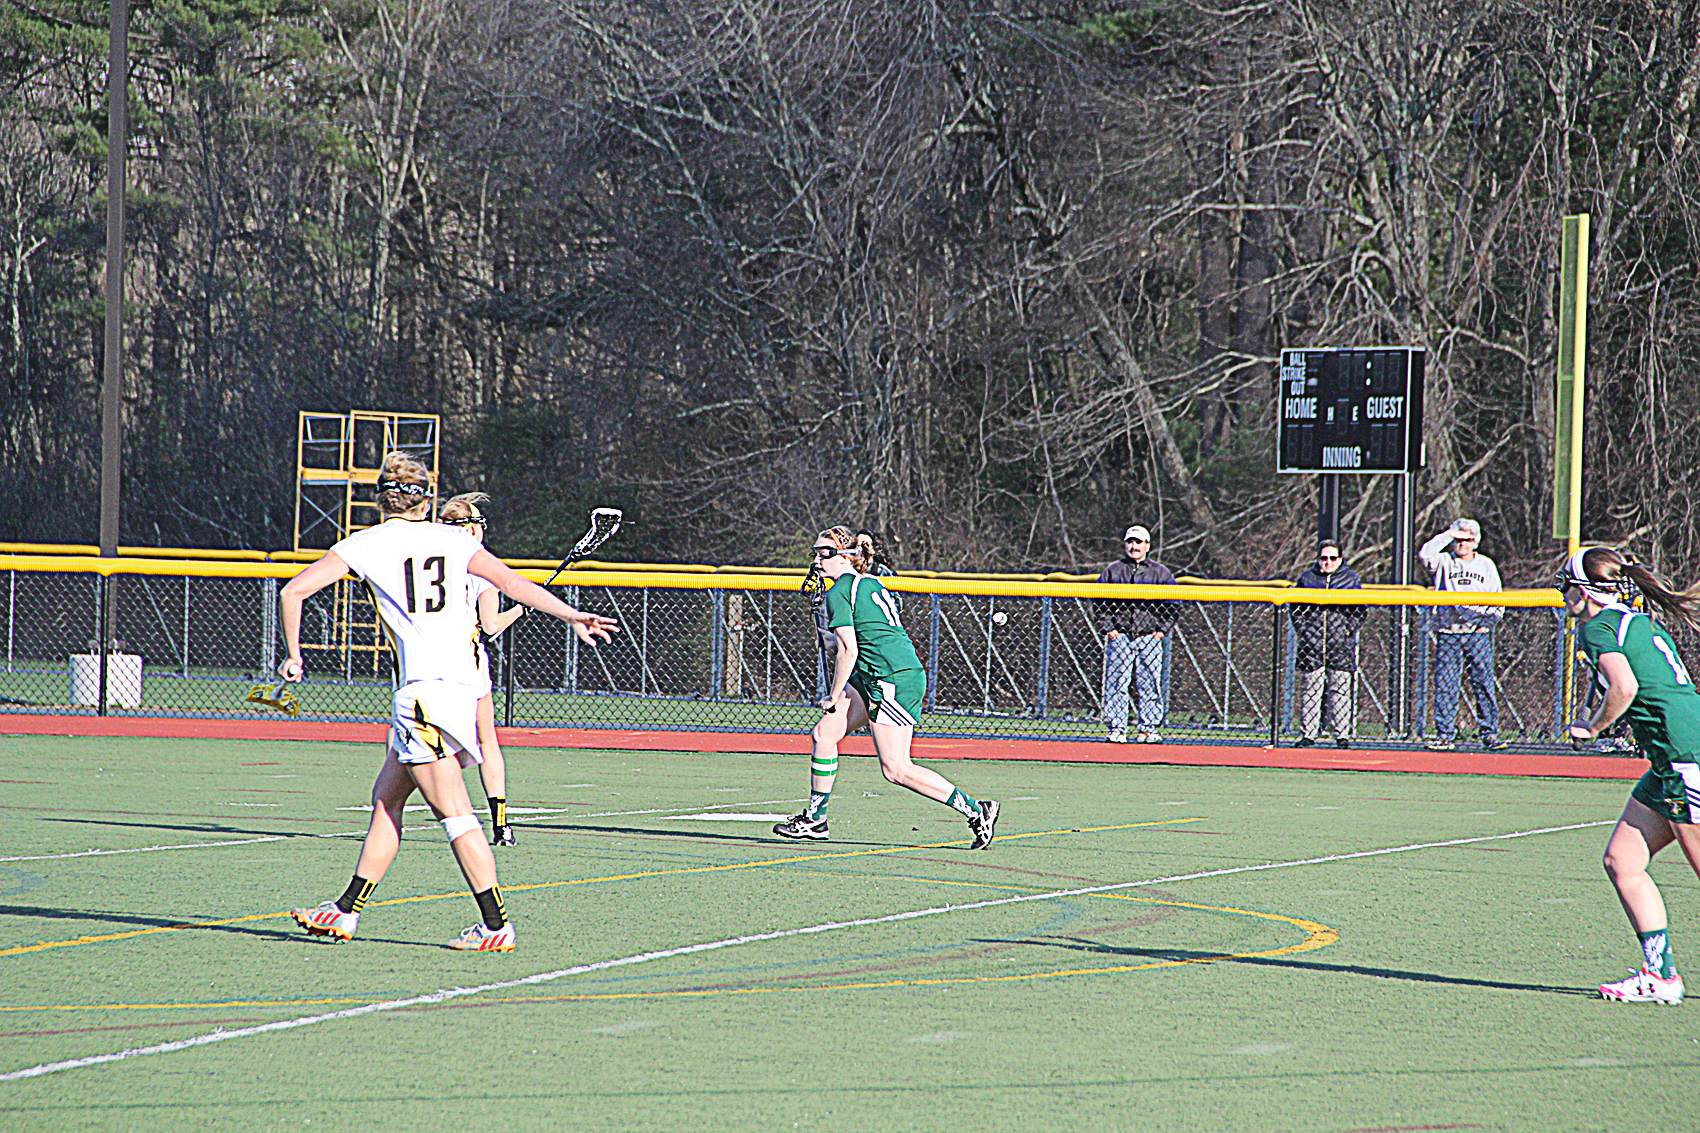 Fitchburg State Streaks Past Framingham State, 15-6